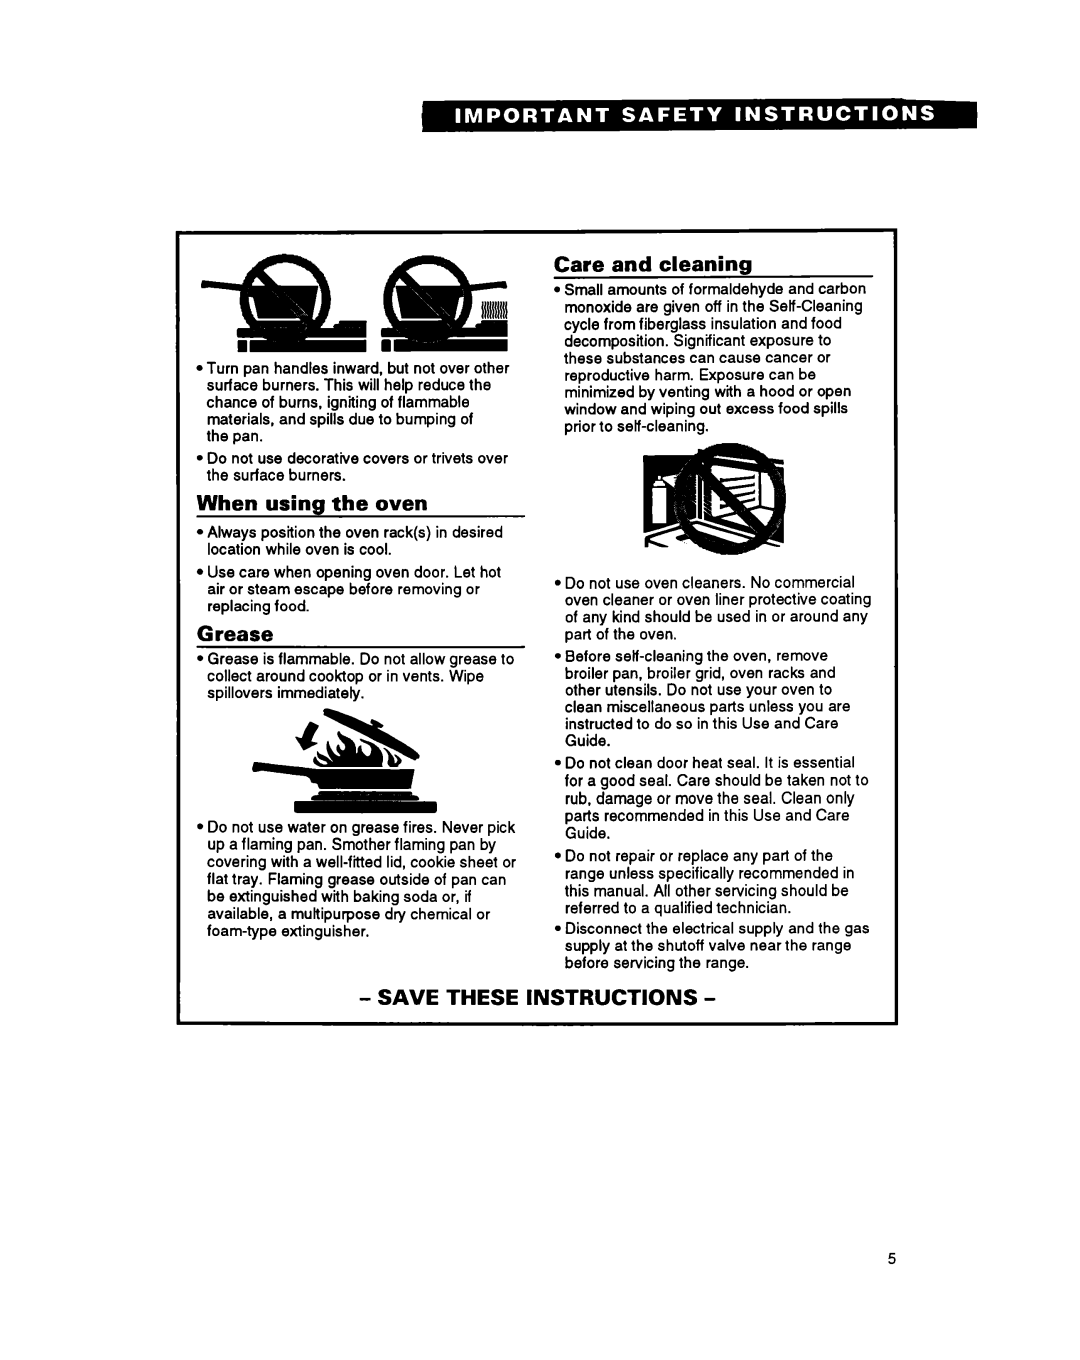 Whirlpool FGS395Y important safety instructions When using the oven, Grease, Care and cleaning, Save These Instructions 